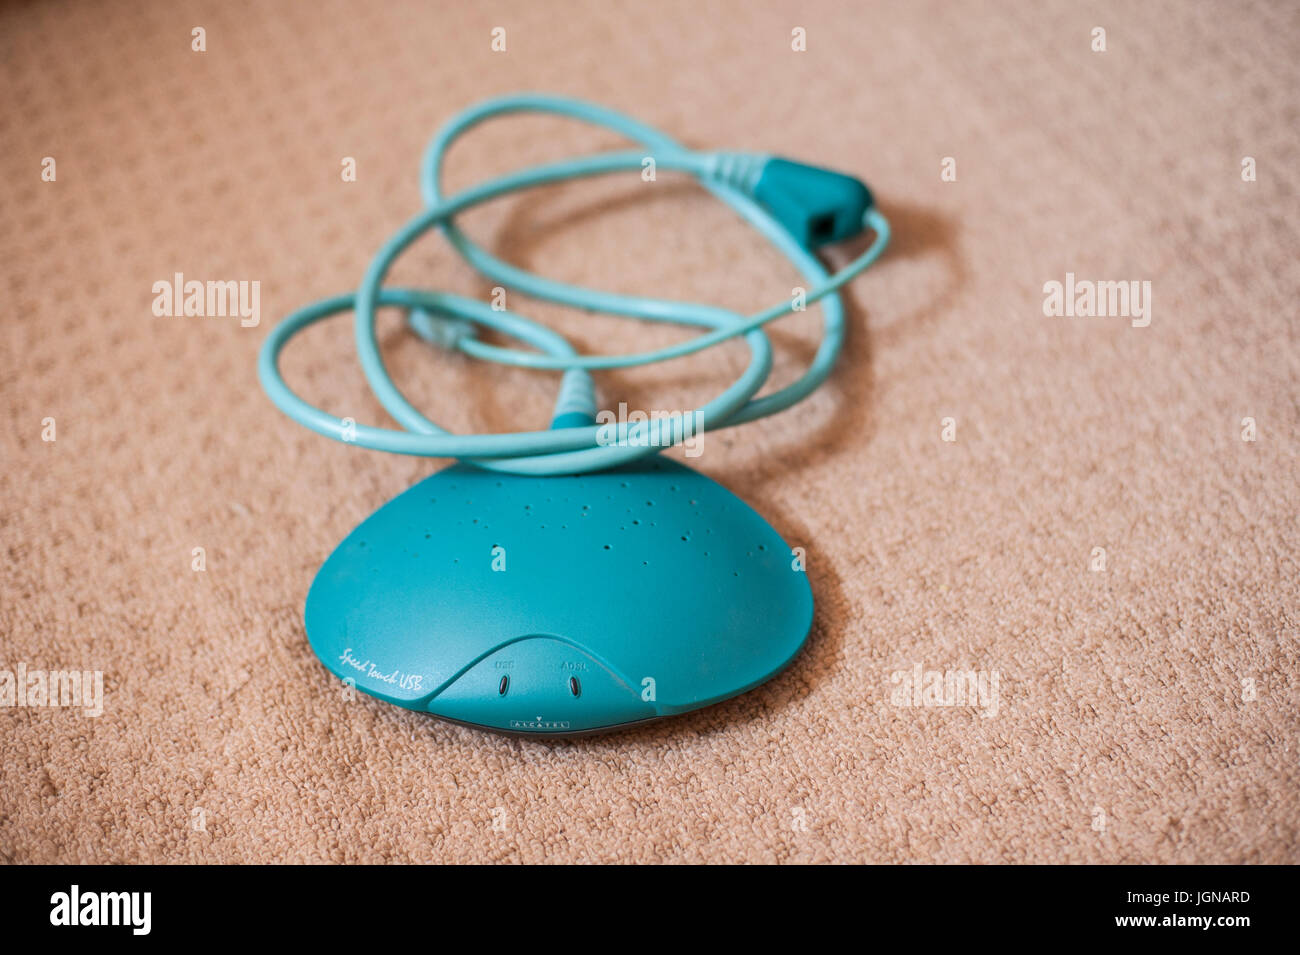 The Speedtouch USB modem used in years 2000 in the UK. Made by Alcatel  company Stock Photo - Alamy